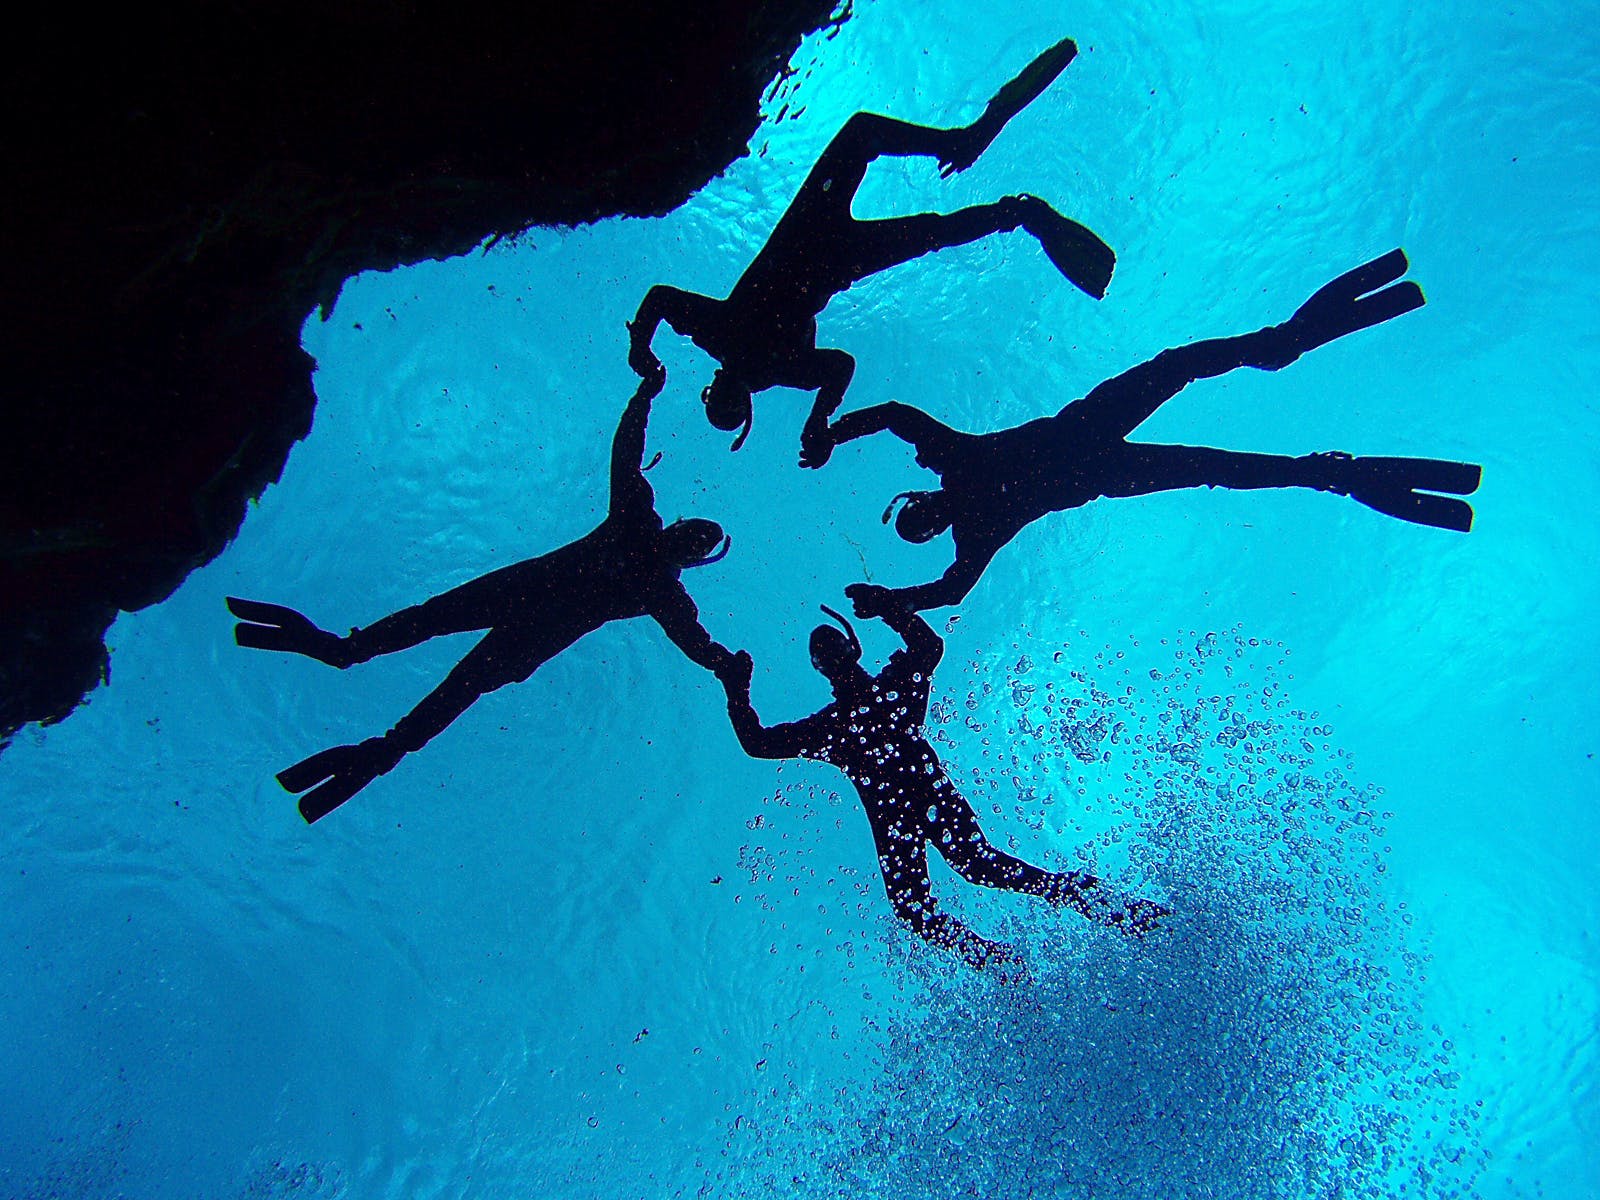 Feel weightless as you float in Silfra fissure on your snorkelling tour.